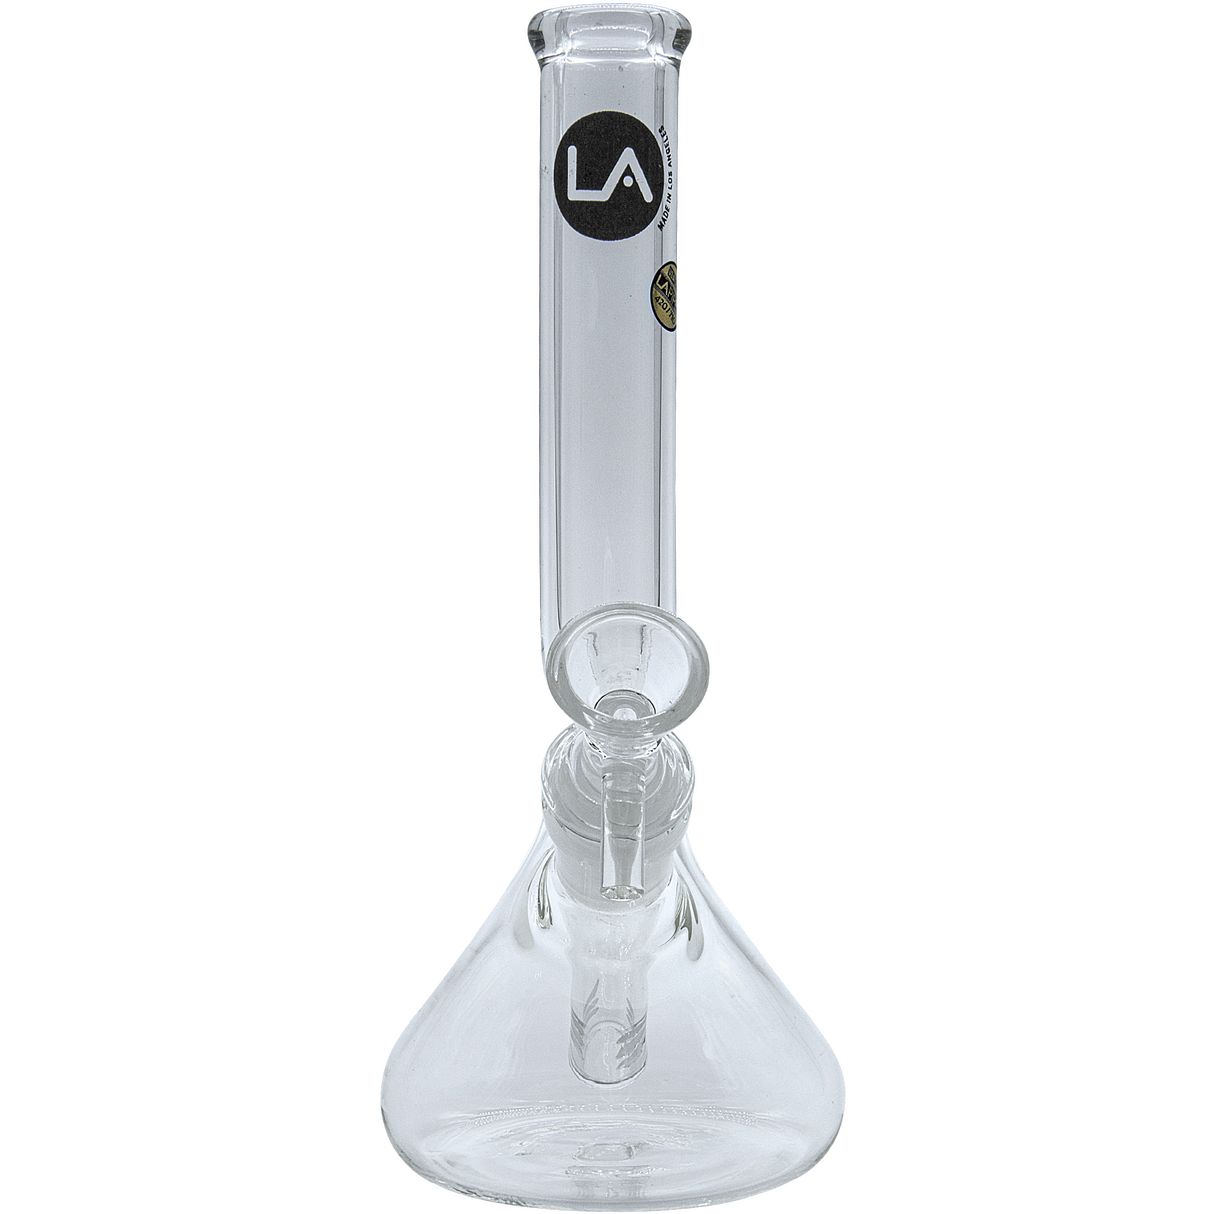 LA Pipes "The Zag" Beaker Zong Style Bong, 8" Height, 18mm Female Joint, Front View